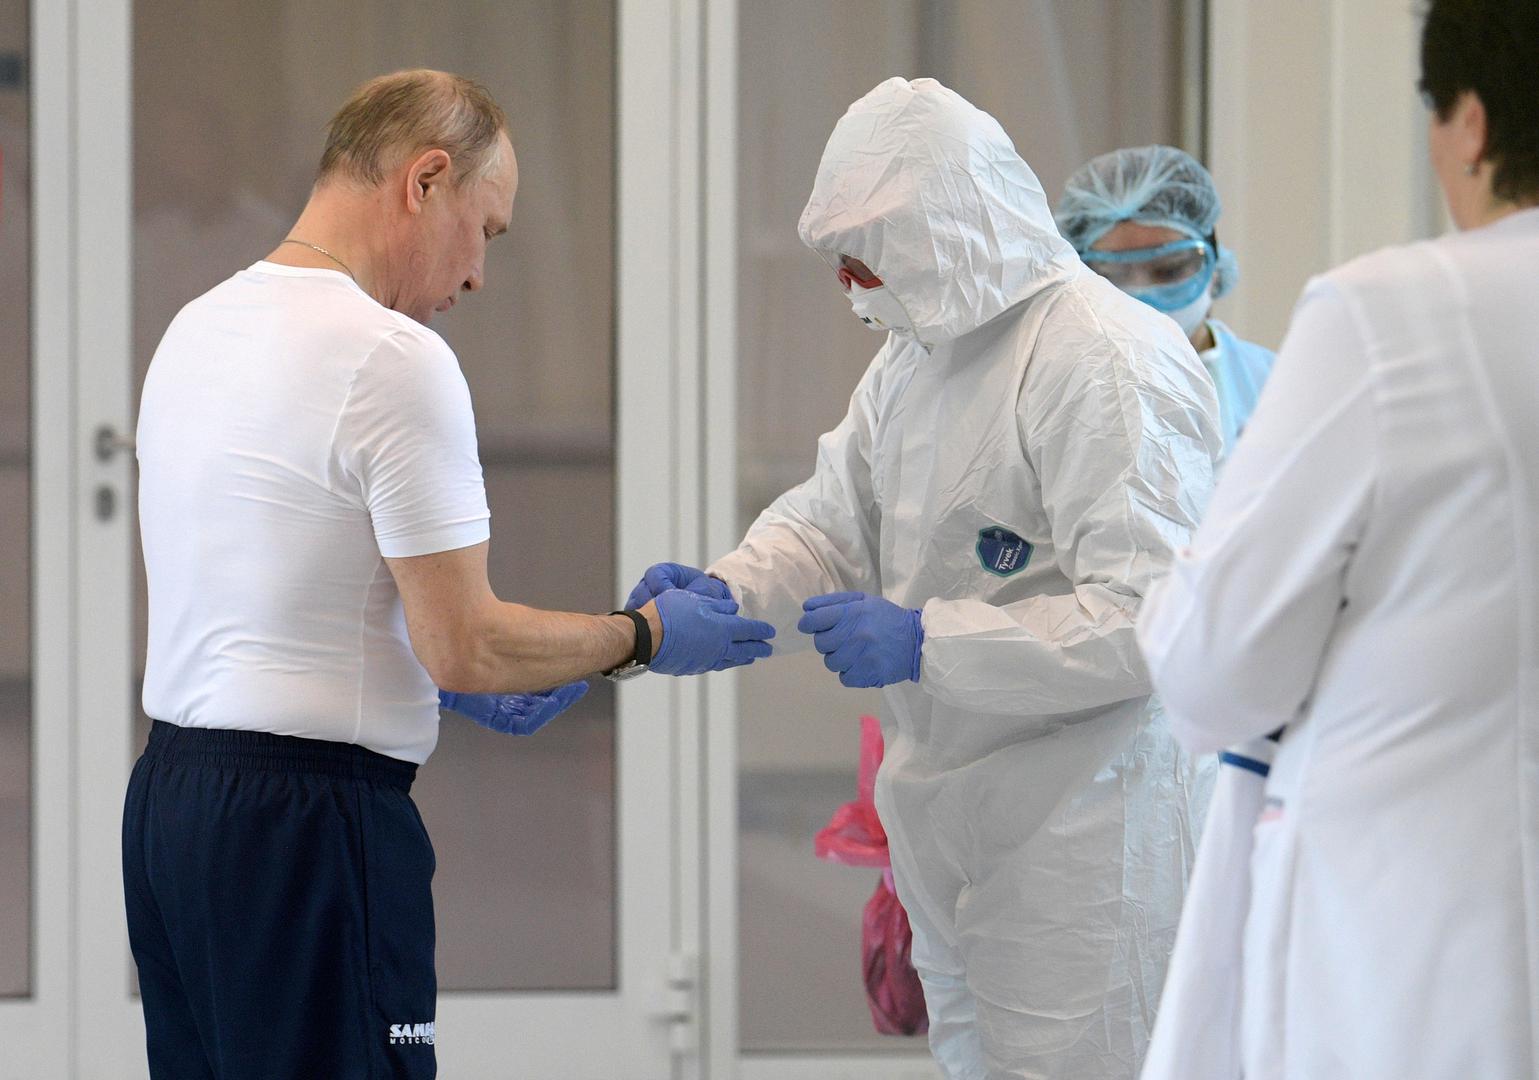 Russian President Putin visits a hospital for patients infected with coronavirus disease (COVID-19) on the outskirts of Moscow Russian President Vladimir Putin takes off protective gloves during his visit to a hospital for patients infected with coronavirus disease (COVID-19) on the outskirts of Moscow, Russia March 24, 2020. Sputnik/Alexey Druzhinin/Kremlin via REUTERS ATTENTION EDITORS - THIS IMAGE WAS PROVIDED BY A THIRD PARTY. SPUTNIK